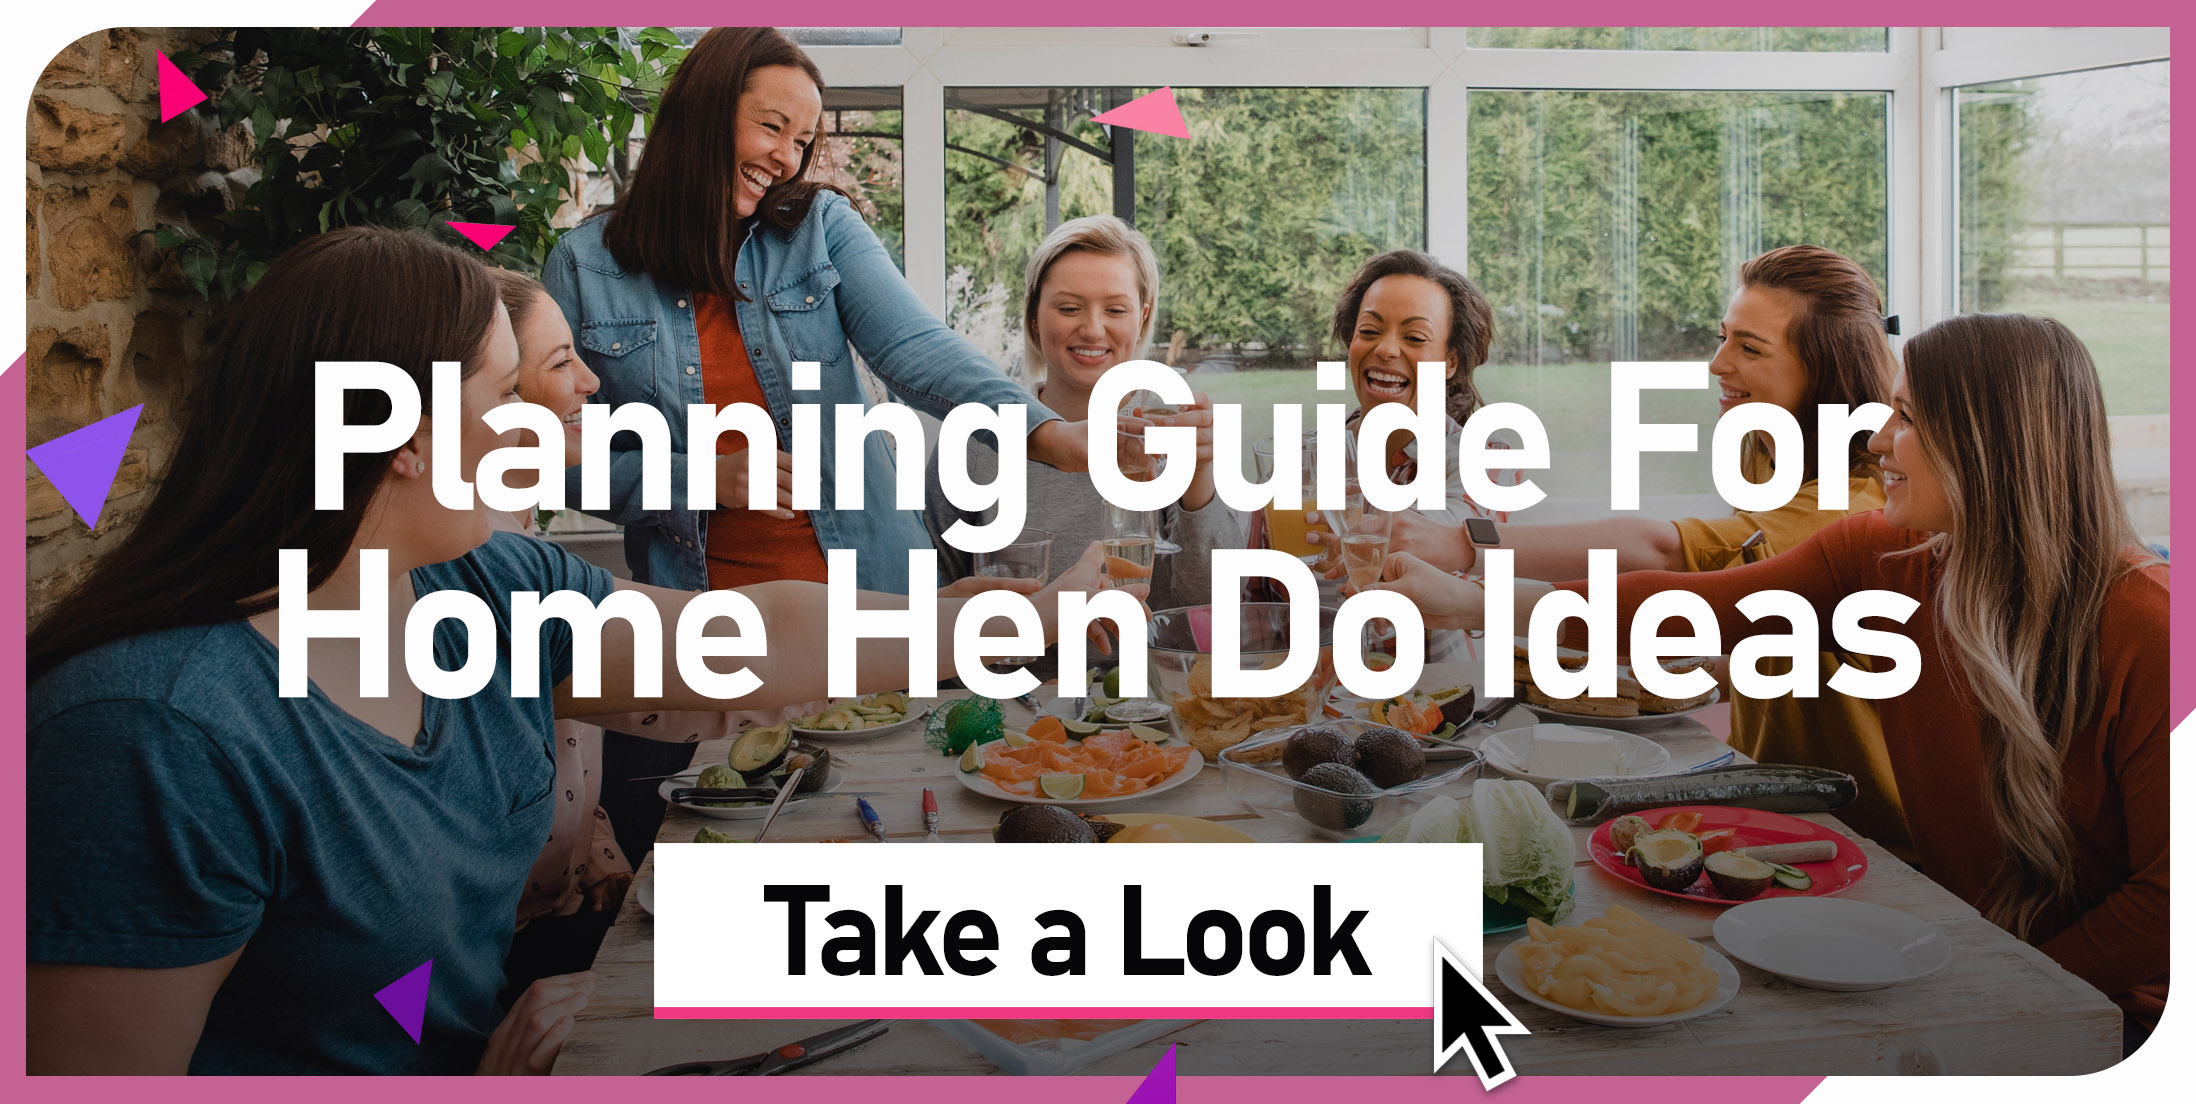 Hen Party ideas at home